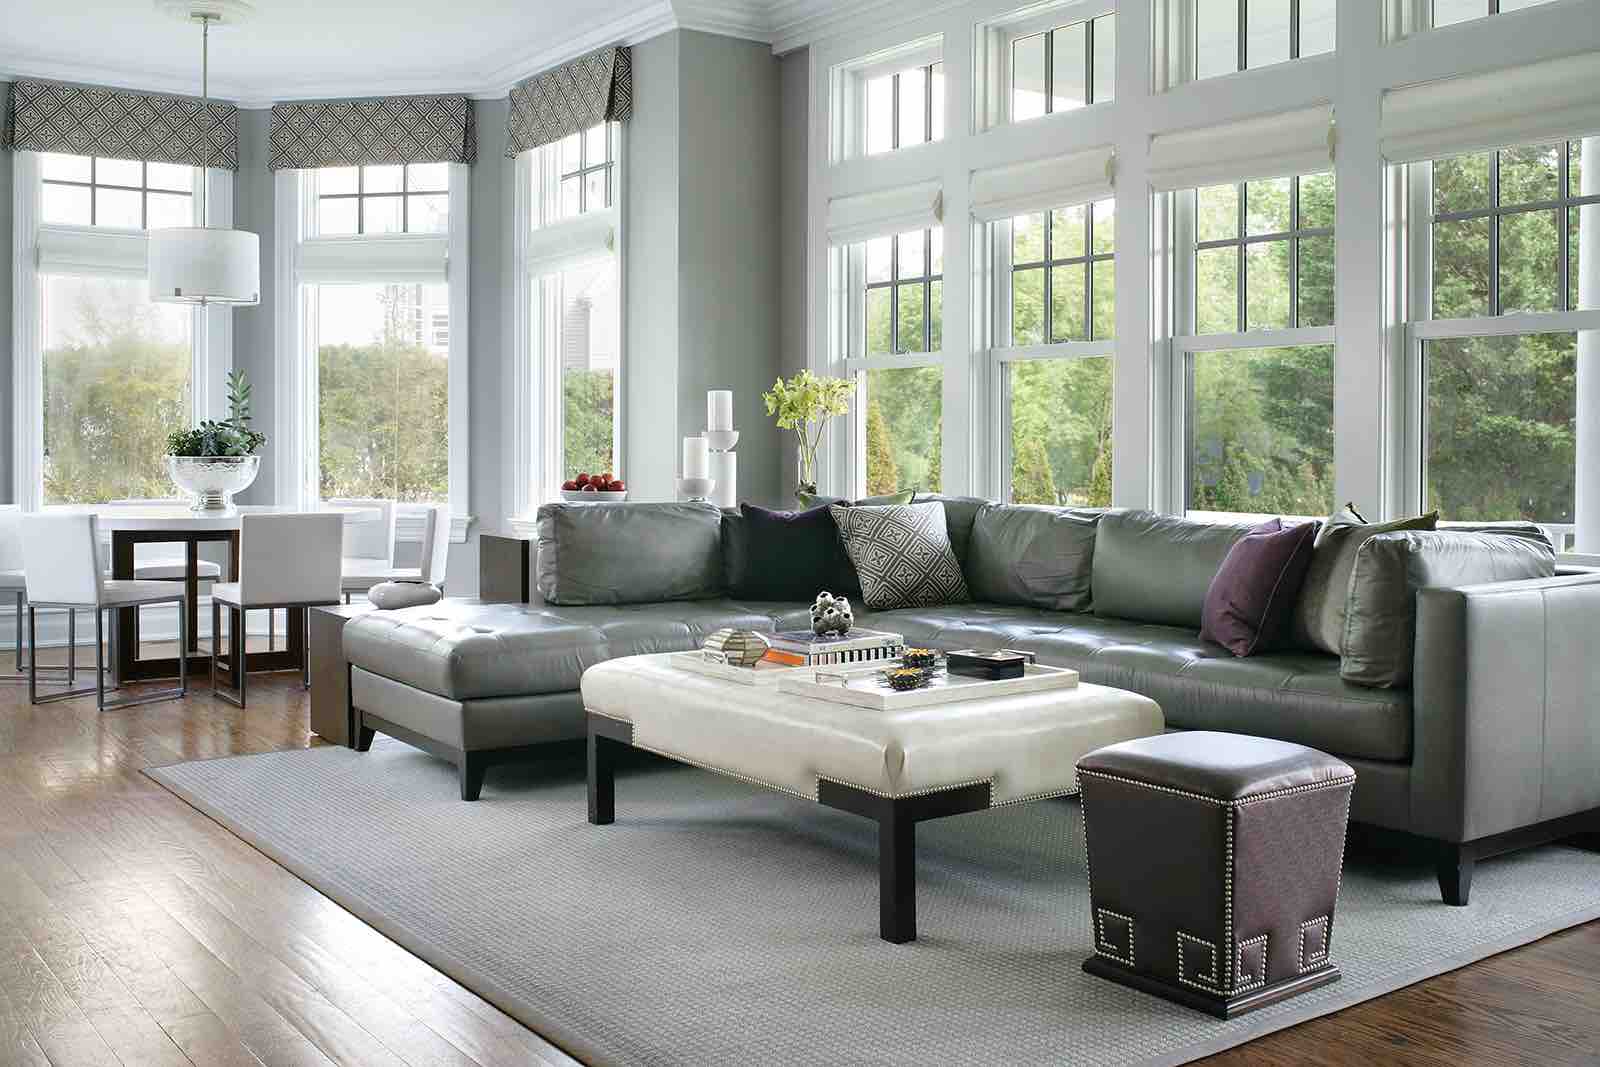 Gray is the Top Color for Interiors